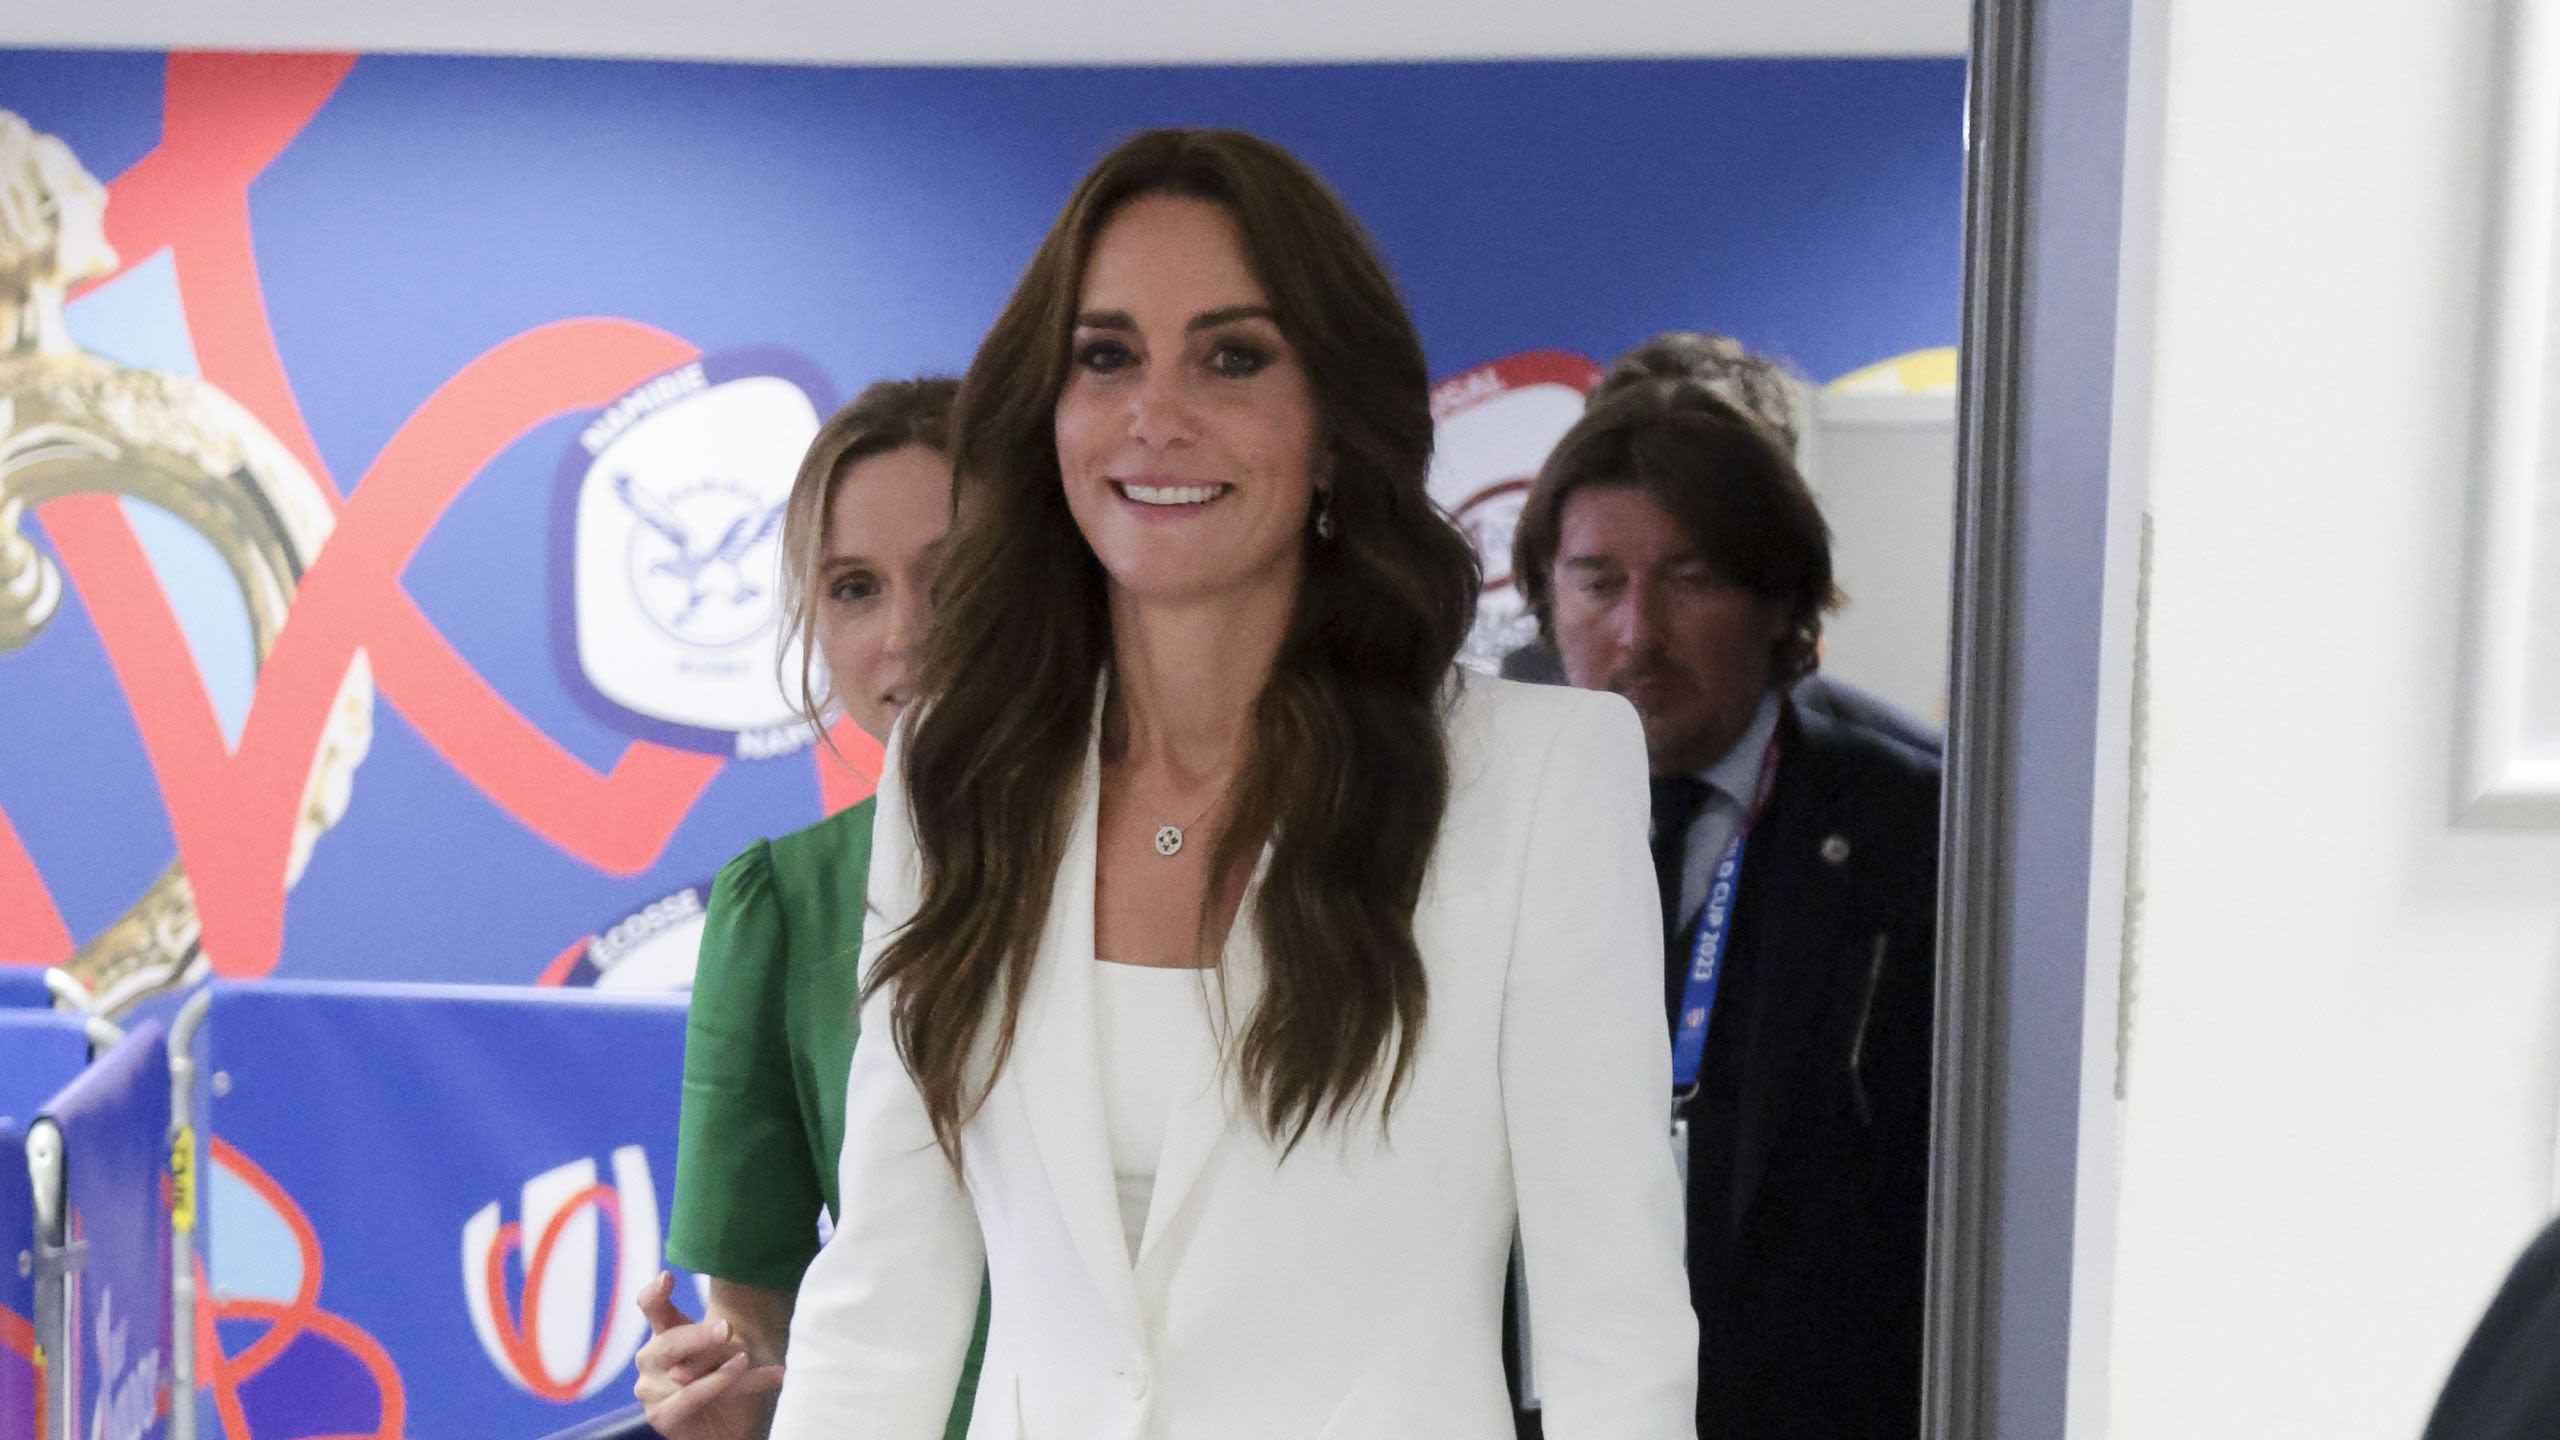 Kate Middleton Has Been Seen ‘Out and About’ With Her Family Amid Cancer Diagnosis